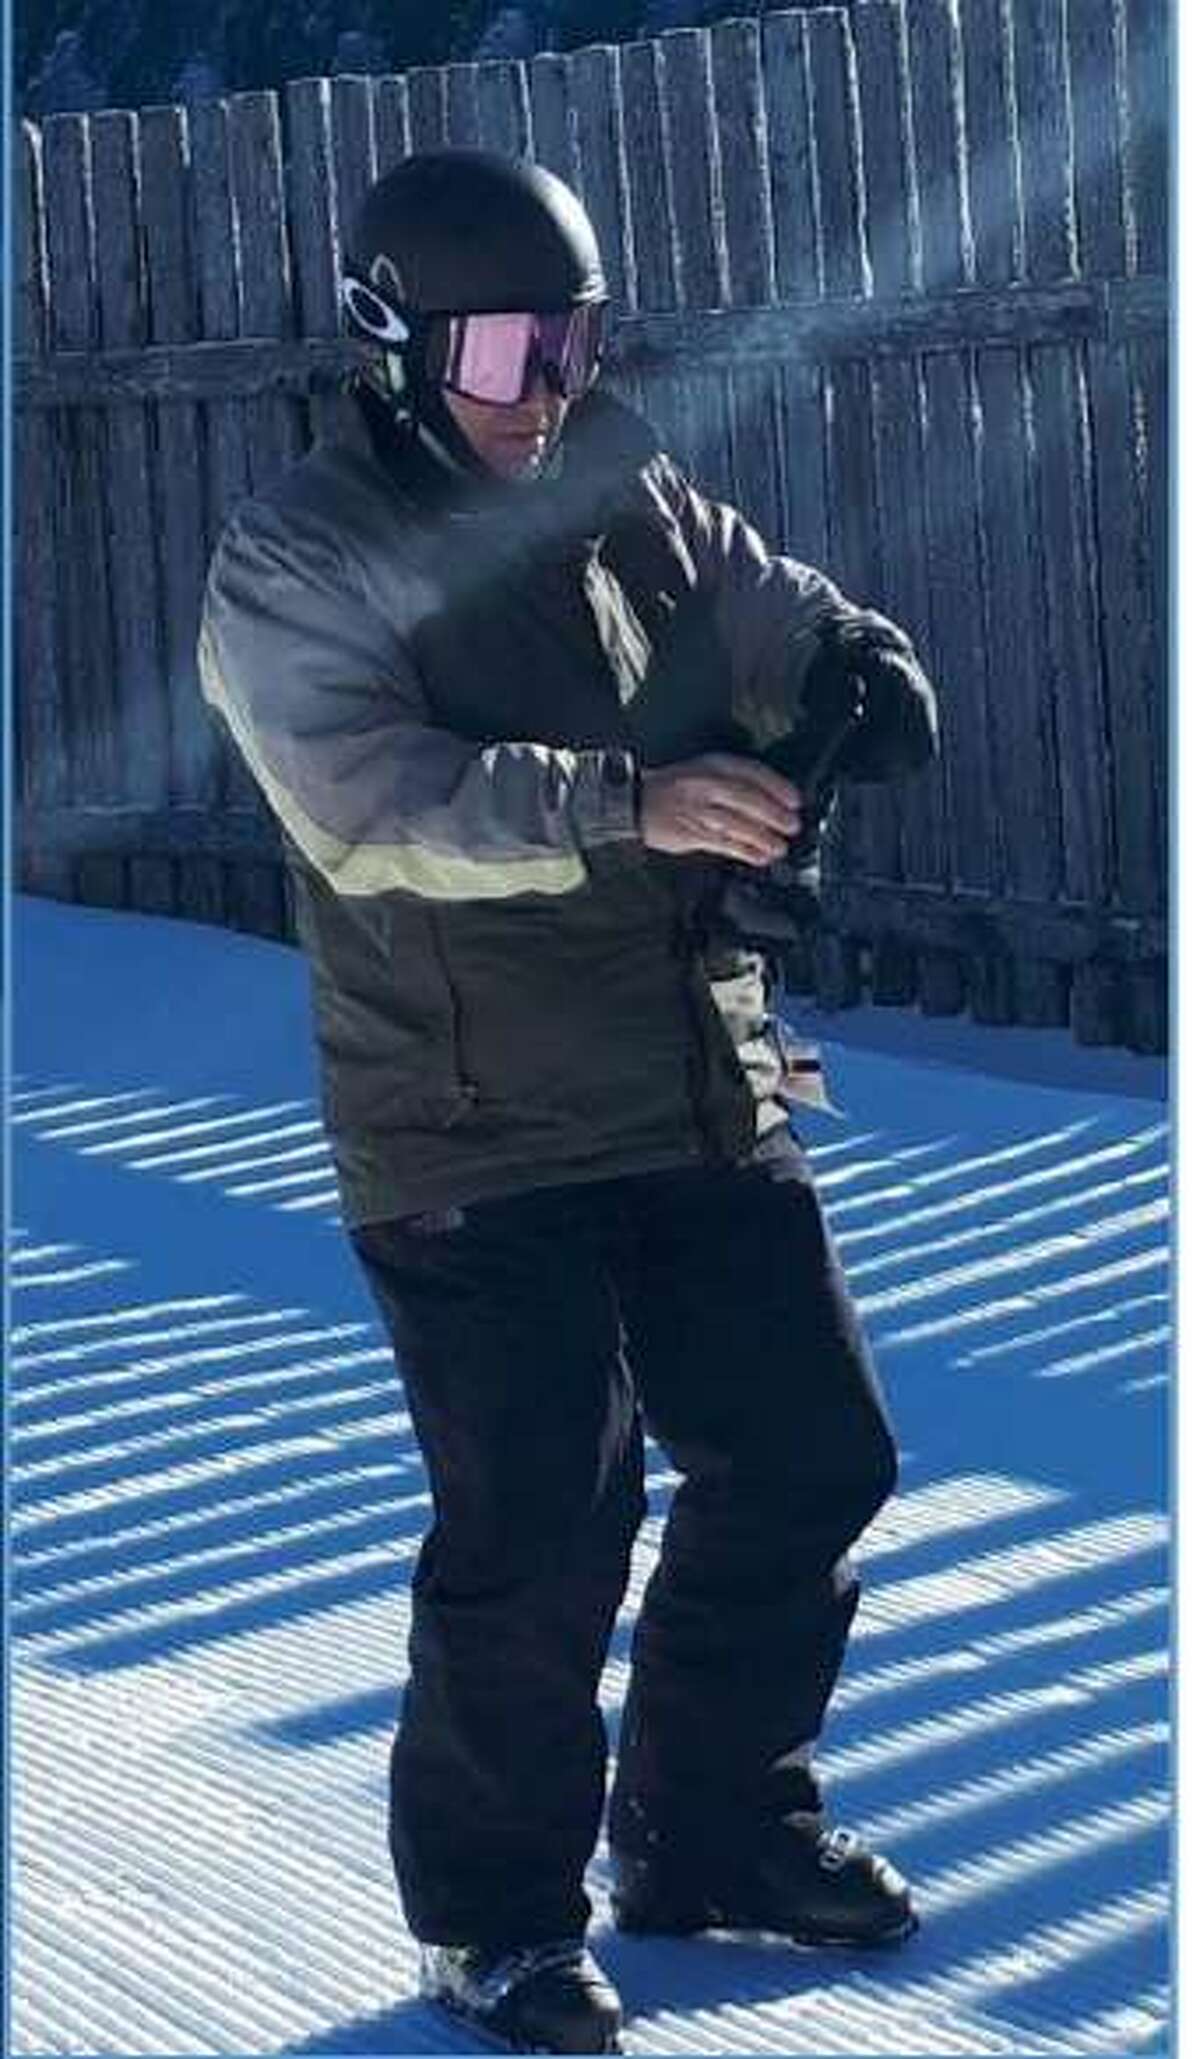 Constantinos "Danny" Filippidis, a 49-year-old firefighter from Toronto, vanished Wednesday, Feb. 7, 2018 at Whiteface Mountain where he was with friends. He was found safe Tuesday in Sacramento, California.